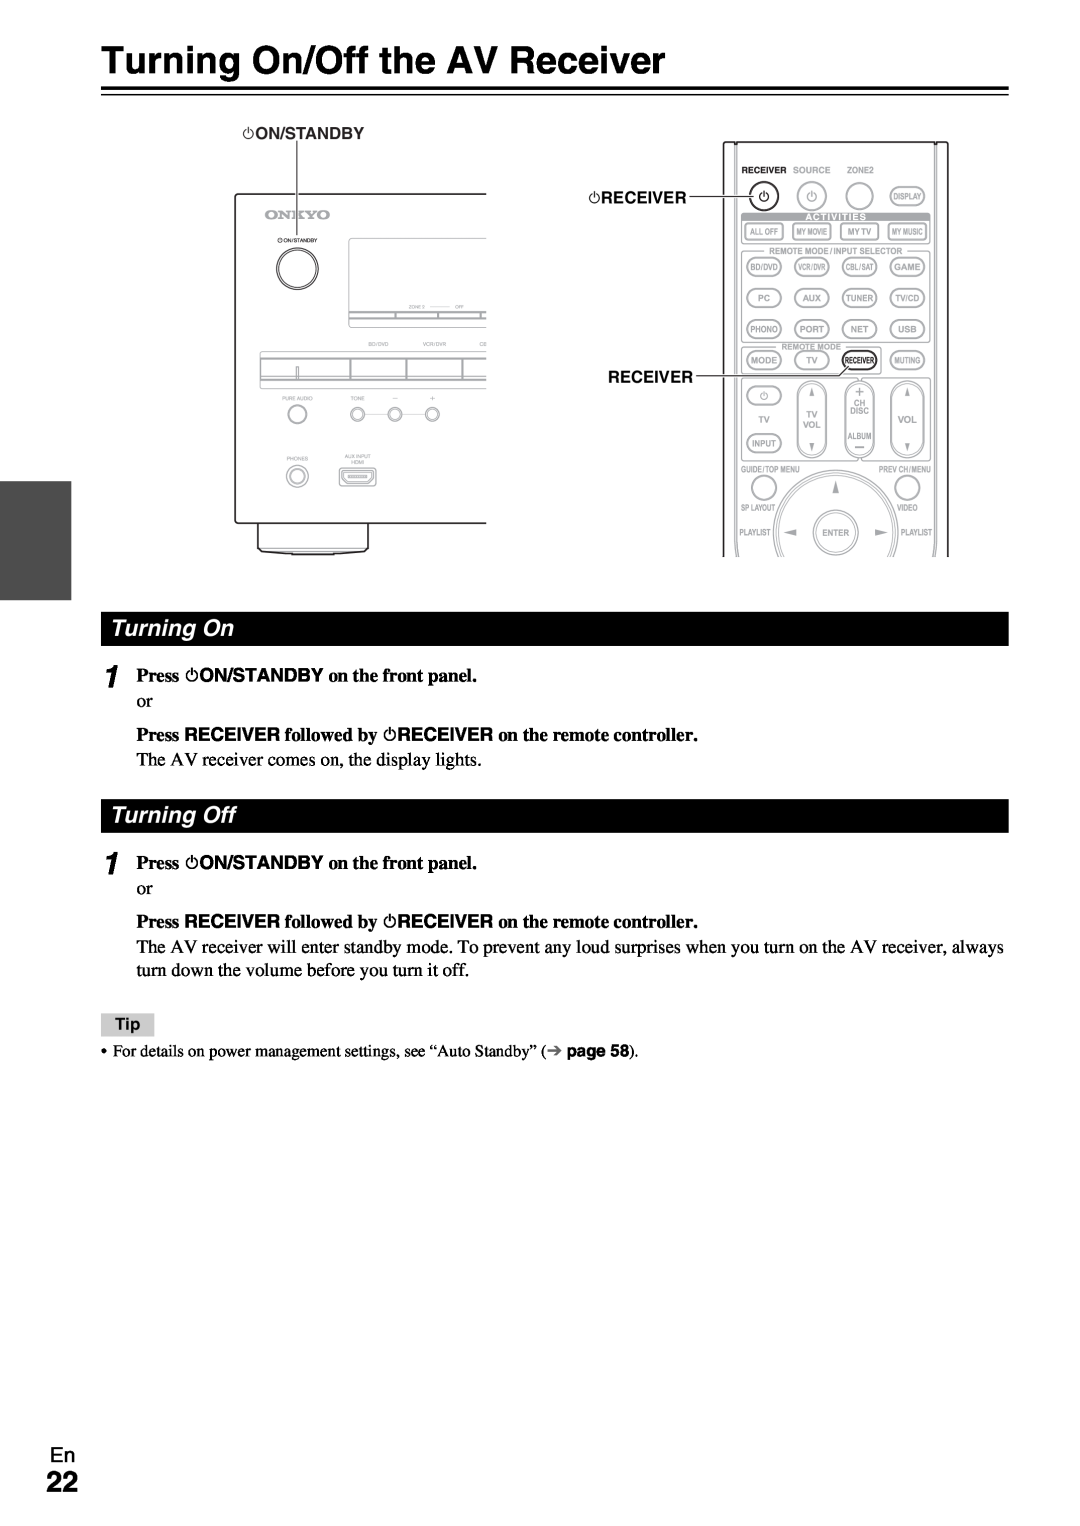 Onkyo HT-RC370 instruction manual Turning On/Off the AV Receiver, Turning Off 